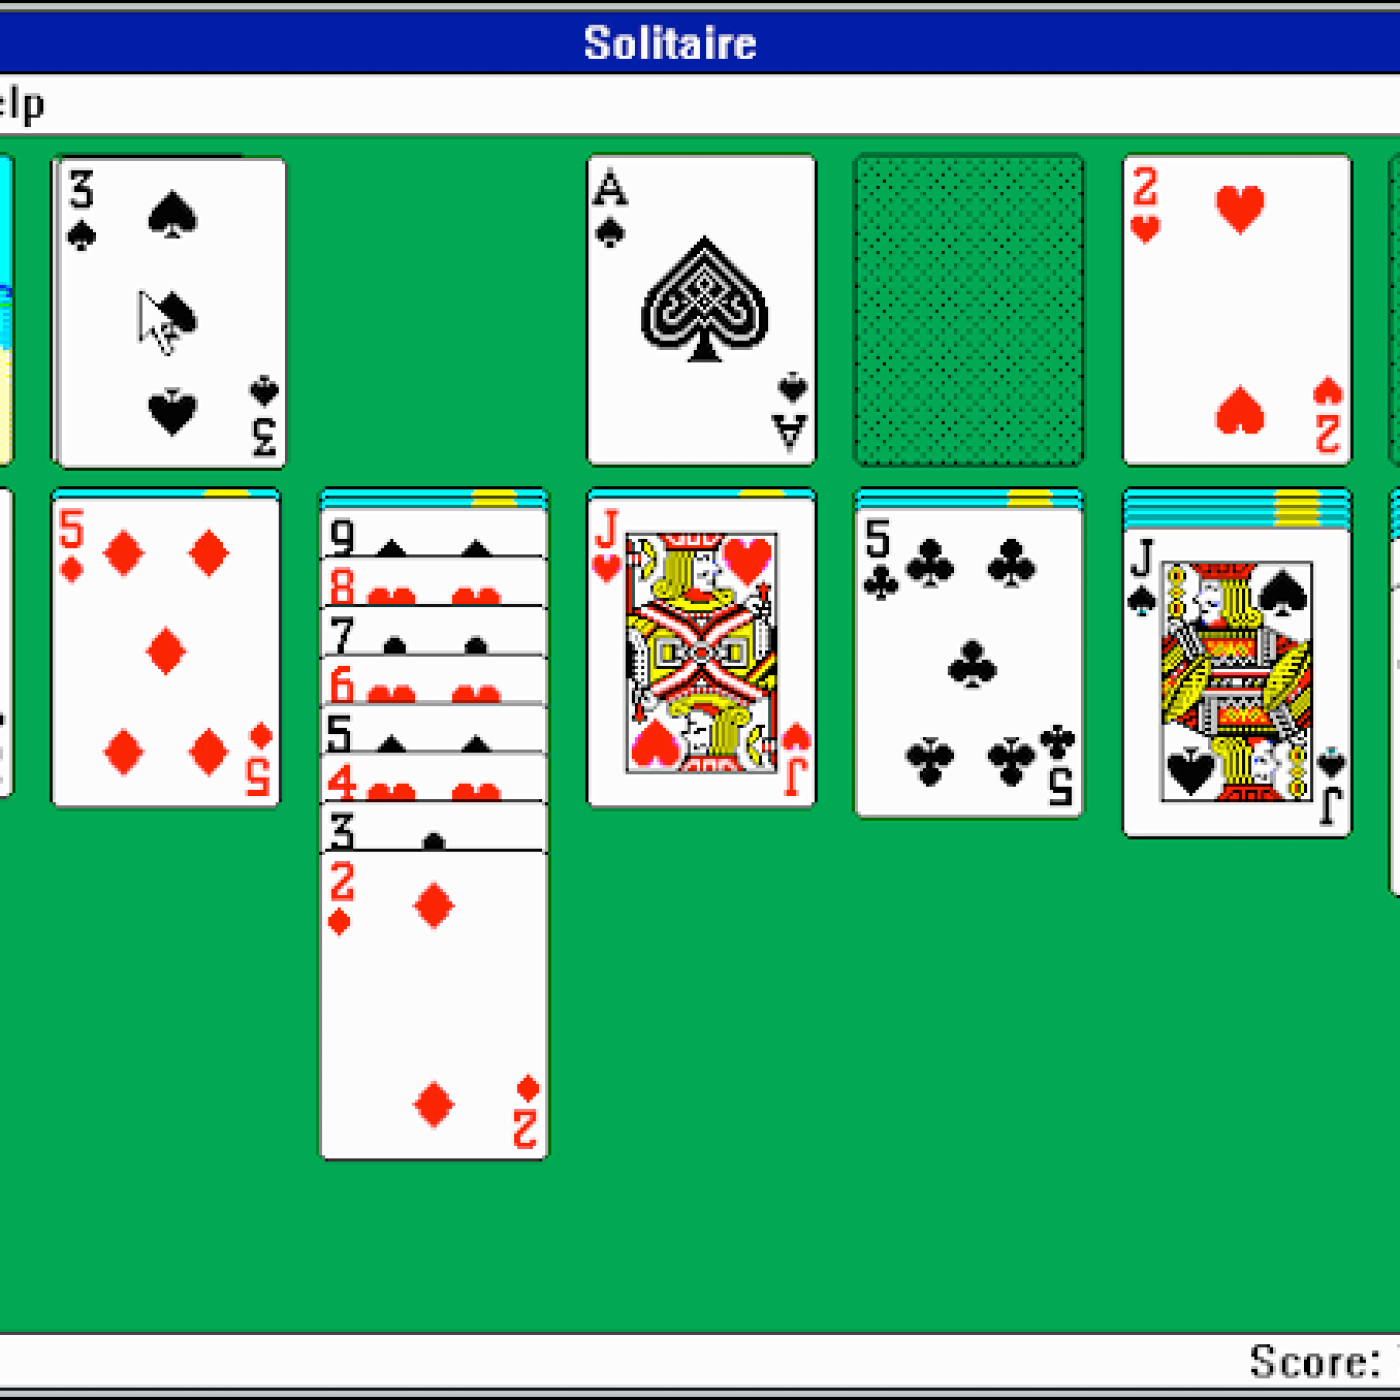 Solitaire S